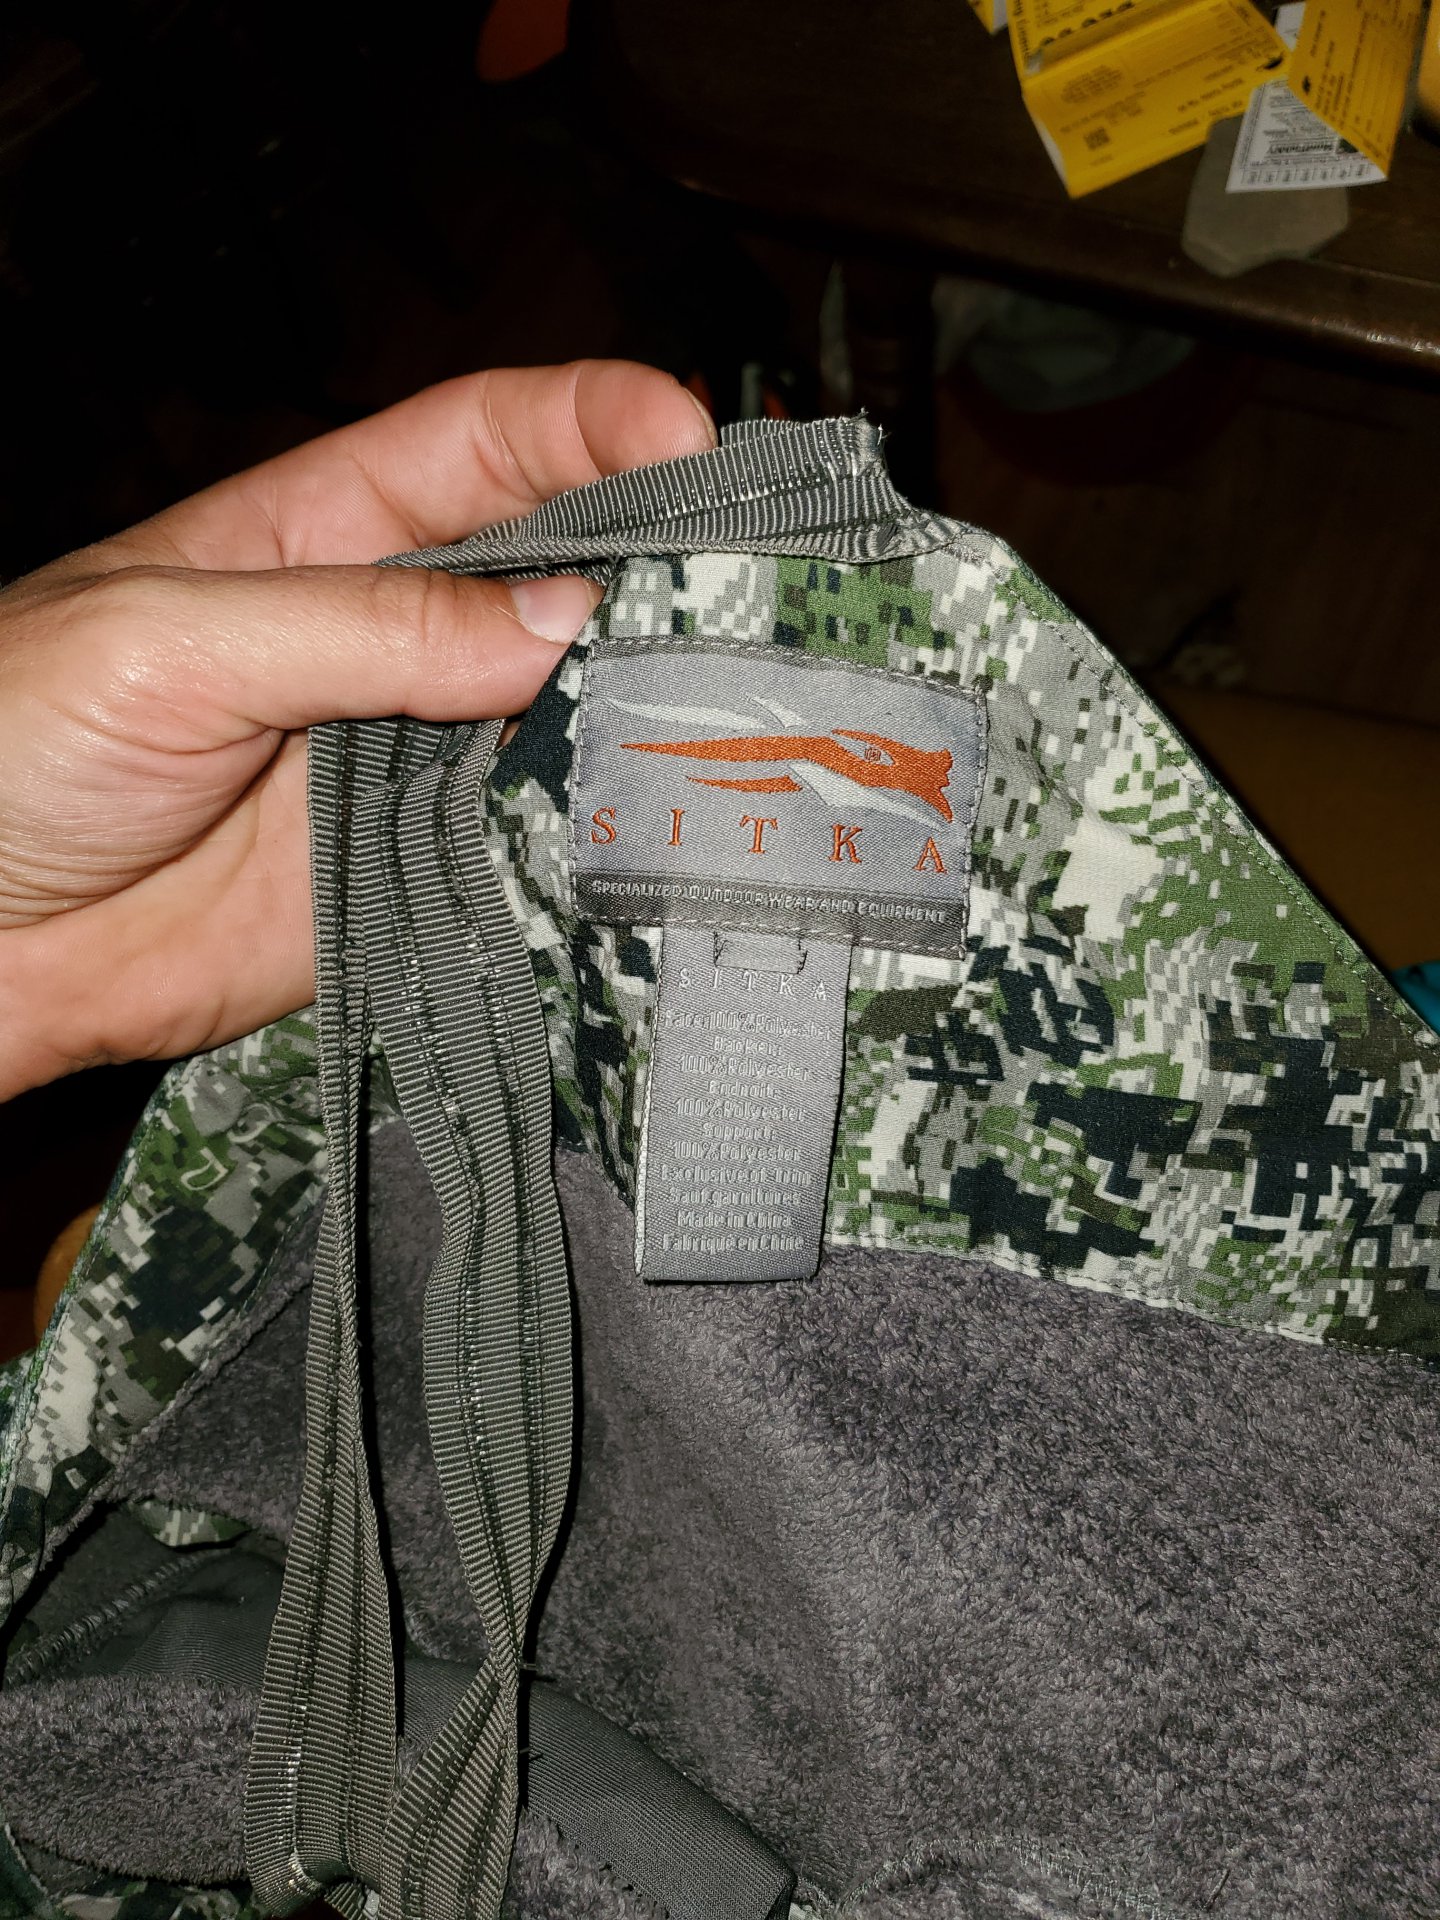 Sitka fanatic jacket and stratus bibs - Hunting Items For Sale and ...